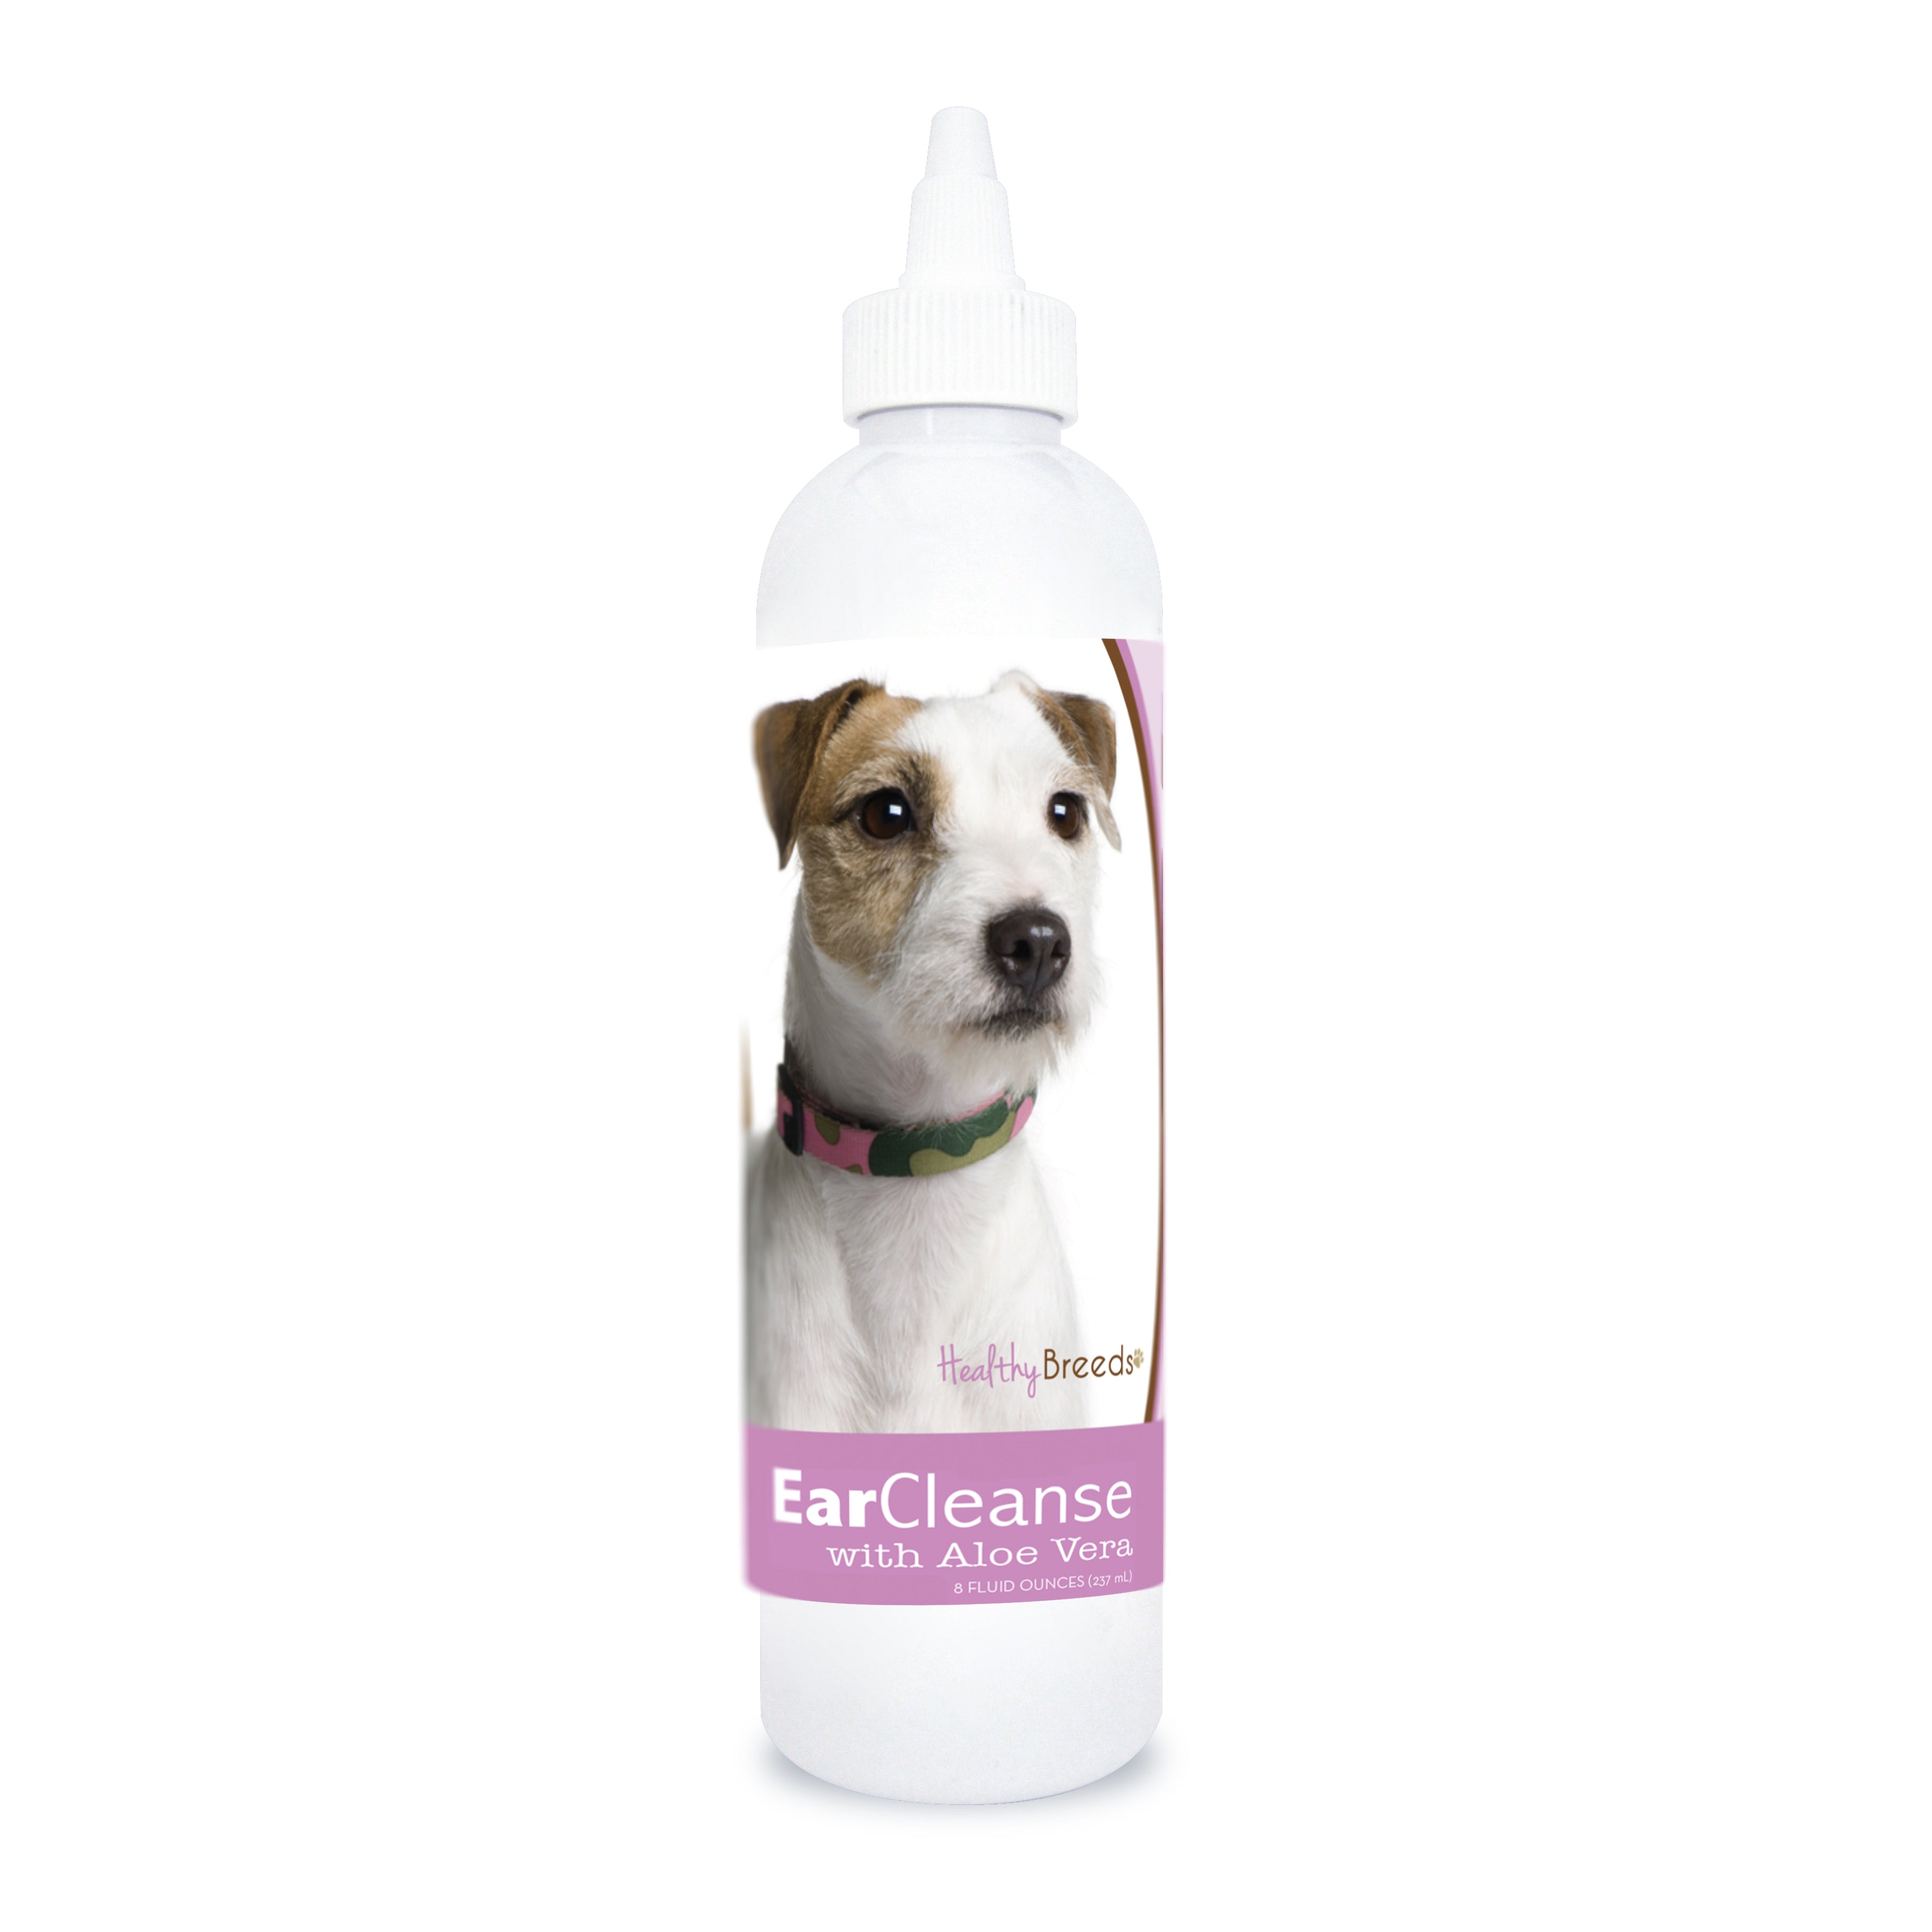 Parson Russell Terrier Ear Cleanse with Aloe Vera Sweet Pea and Vanilla 8 oz